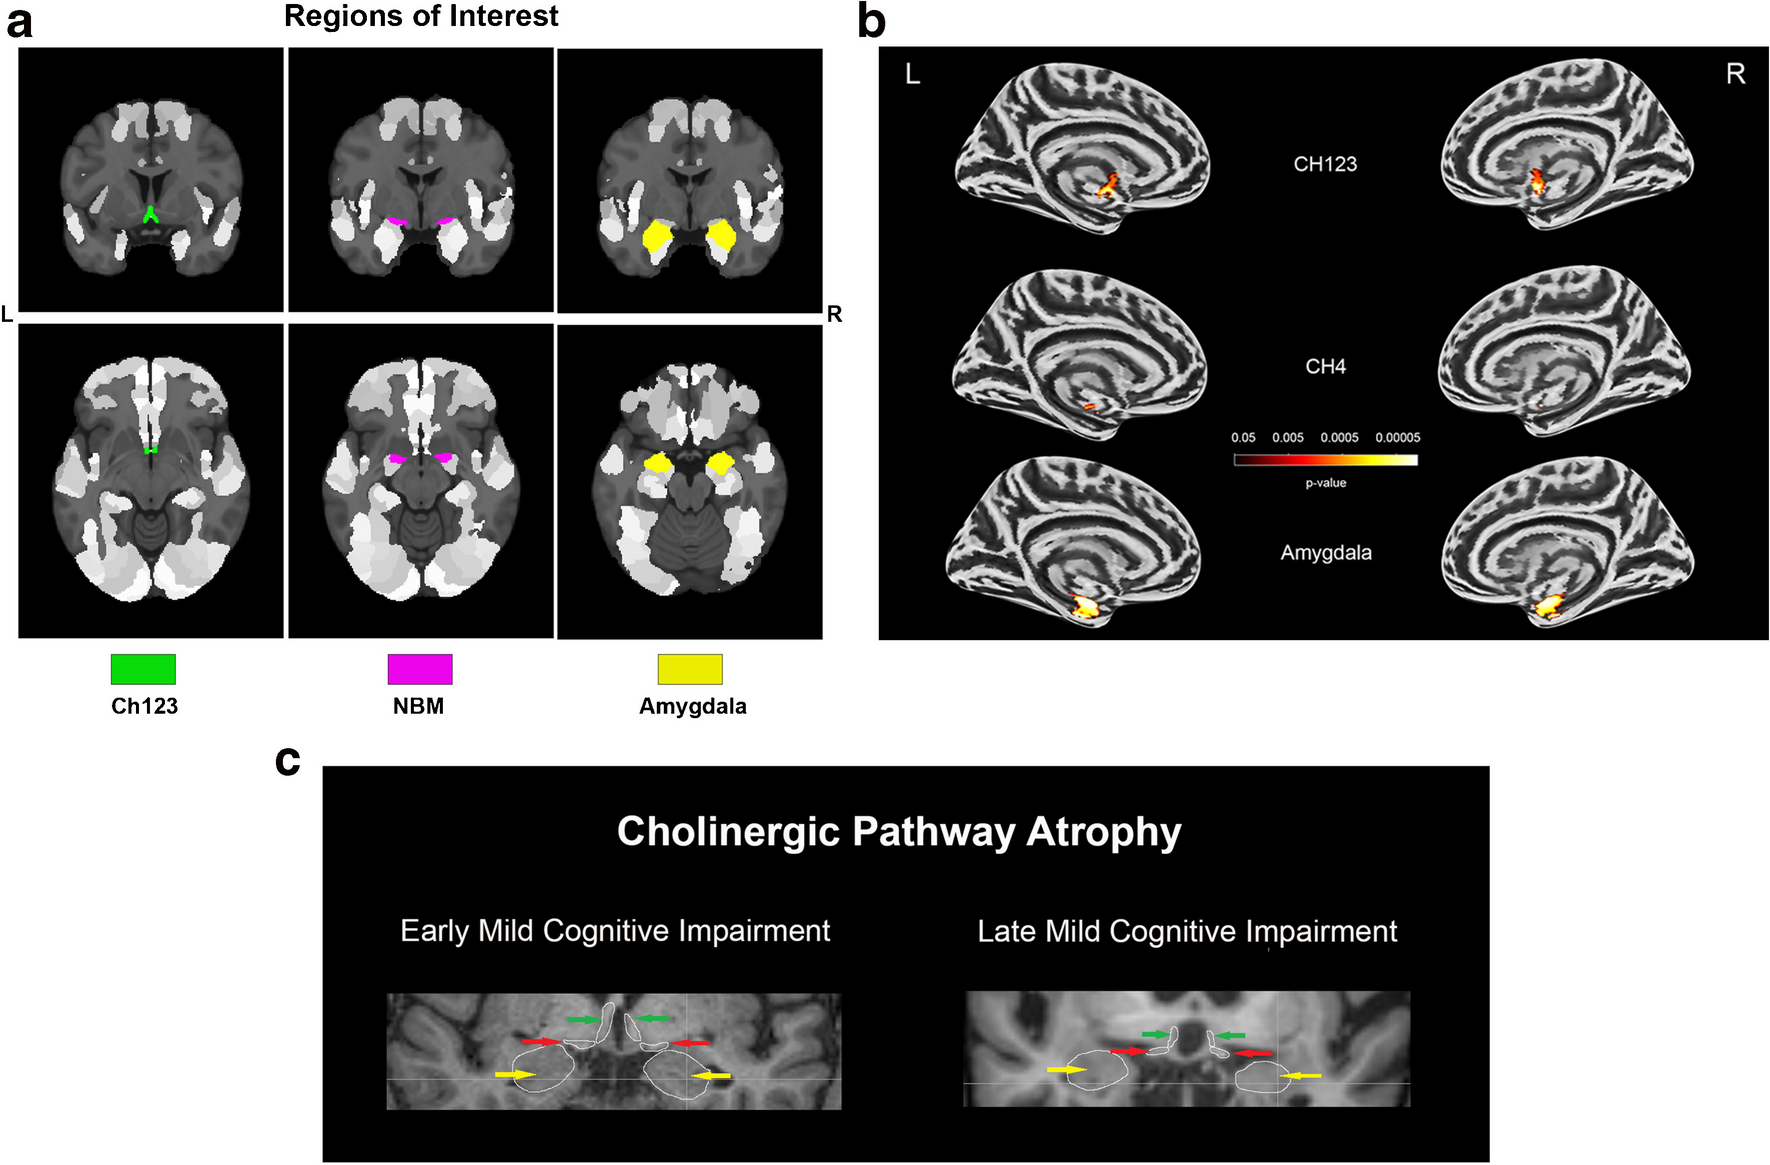 Atrophy of the cholinergic regions advances from early to late mild cognitive impairment